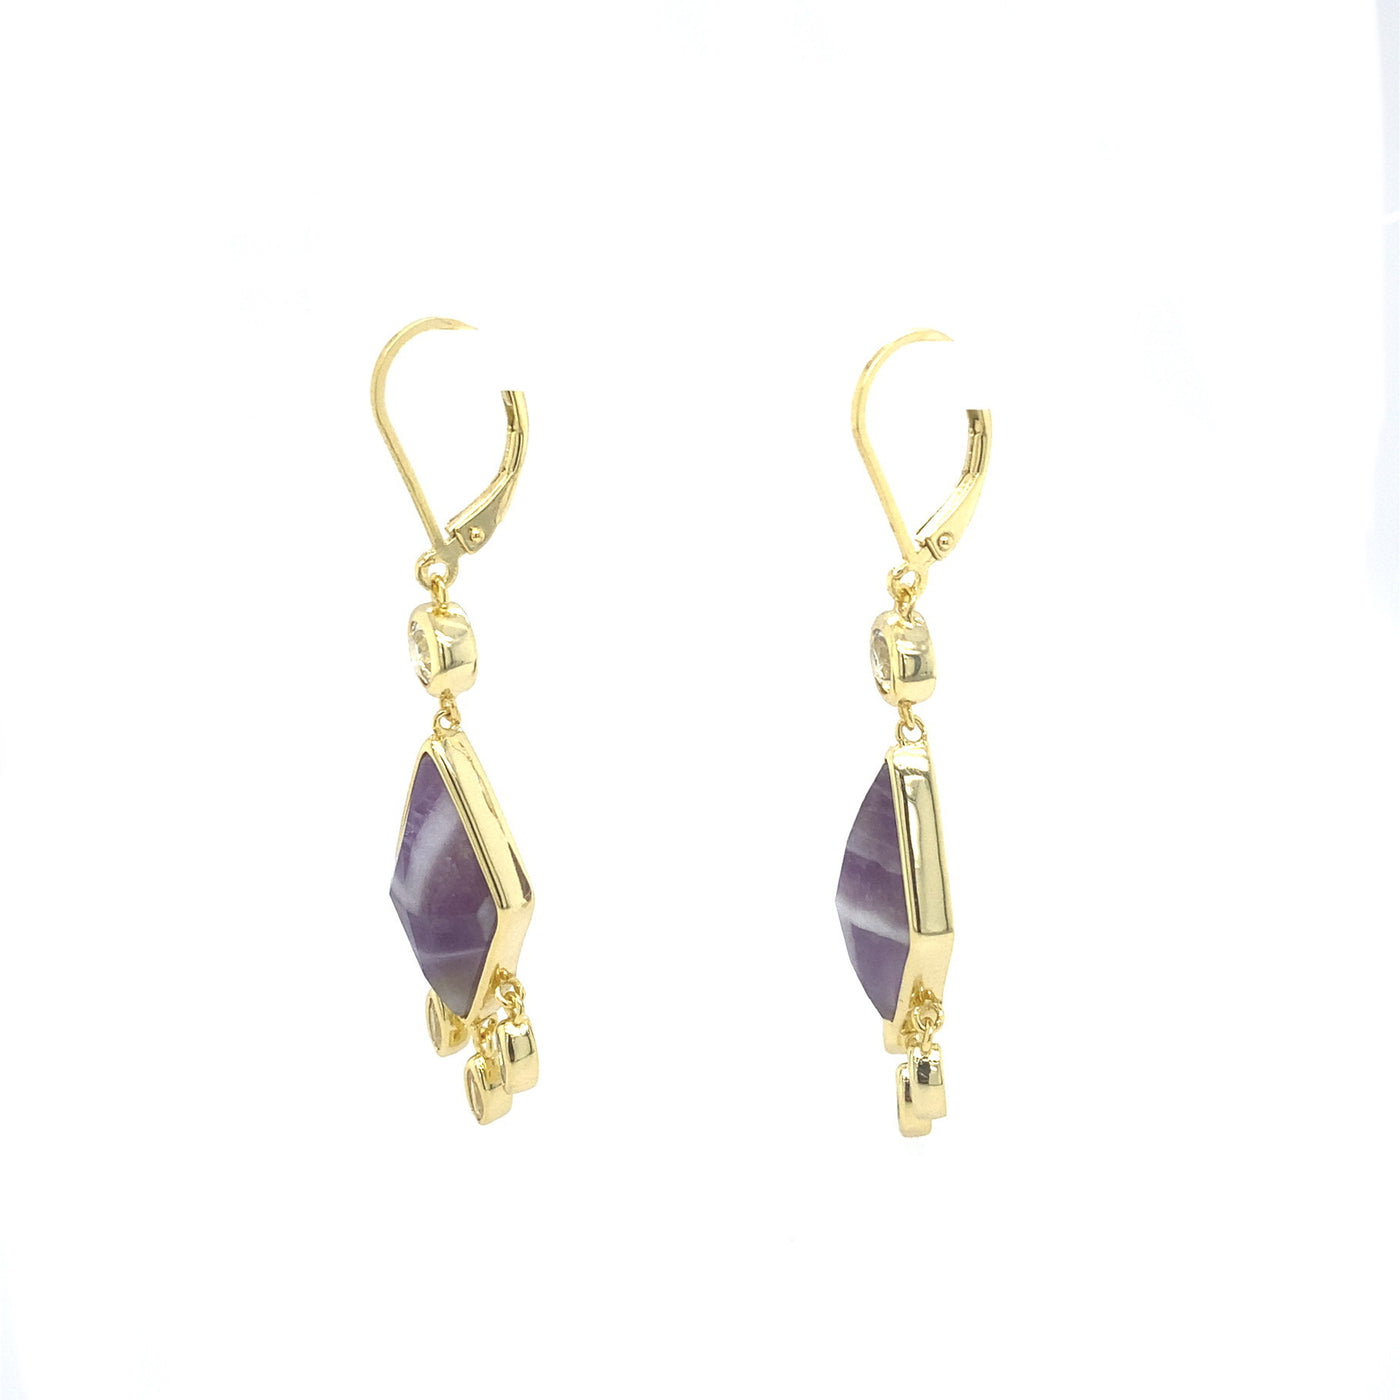 Sterling Silver Kite Chevron Amethyst with Cubic Zirconia Accents Leverback Earrings